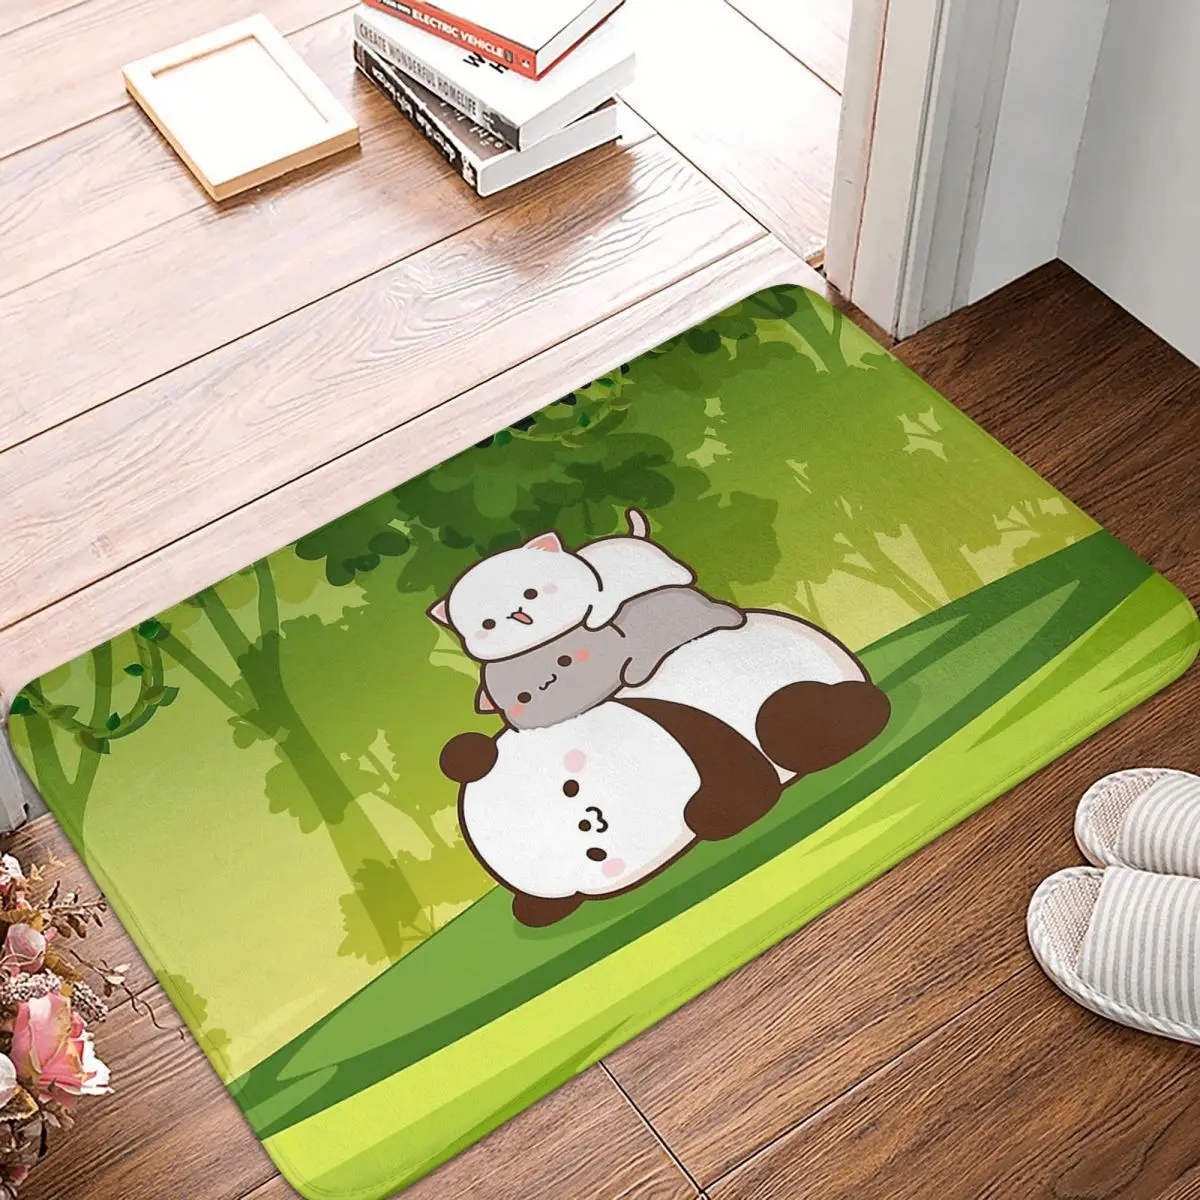 

Peach Cat Non-slip Doormat Goma Had Fun In The Forest With A Panda Bath Bedroom Mat Outdoor Carpet Indoor Modern Decor